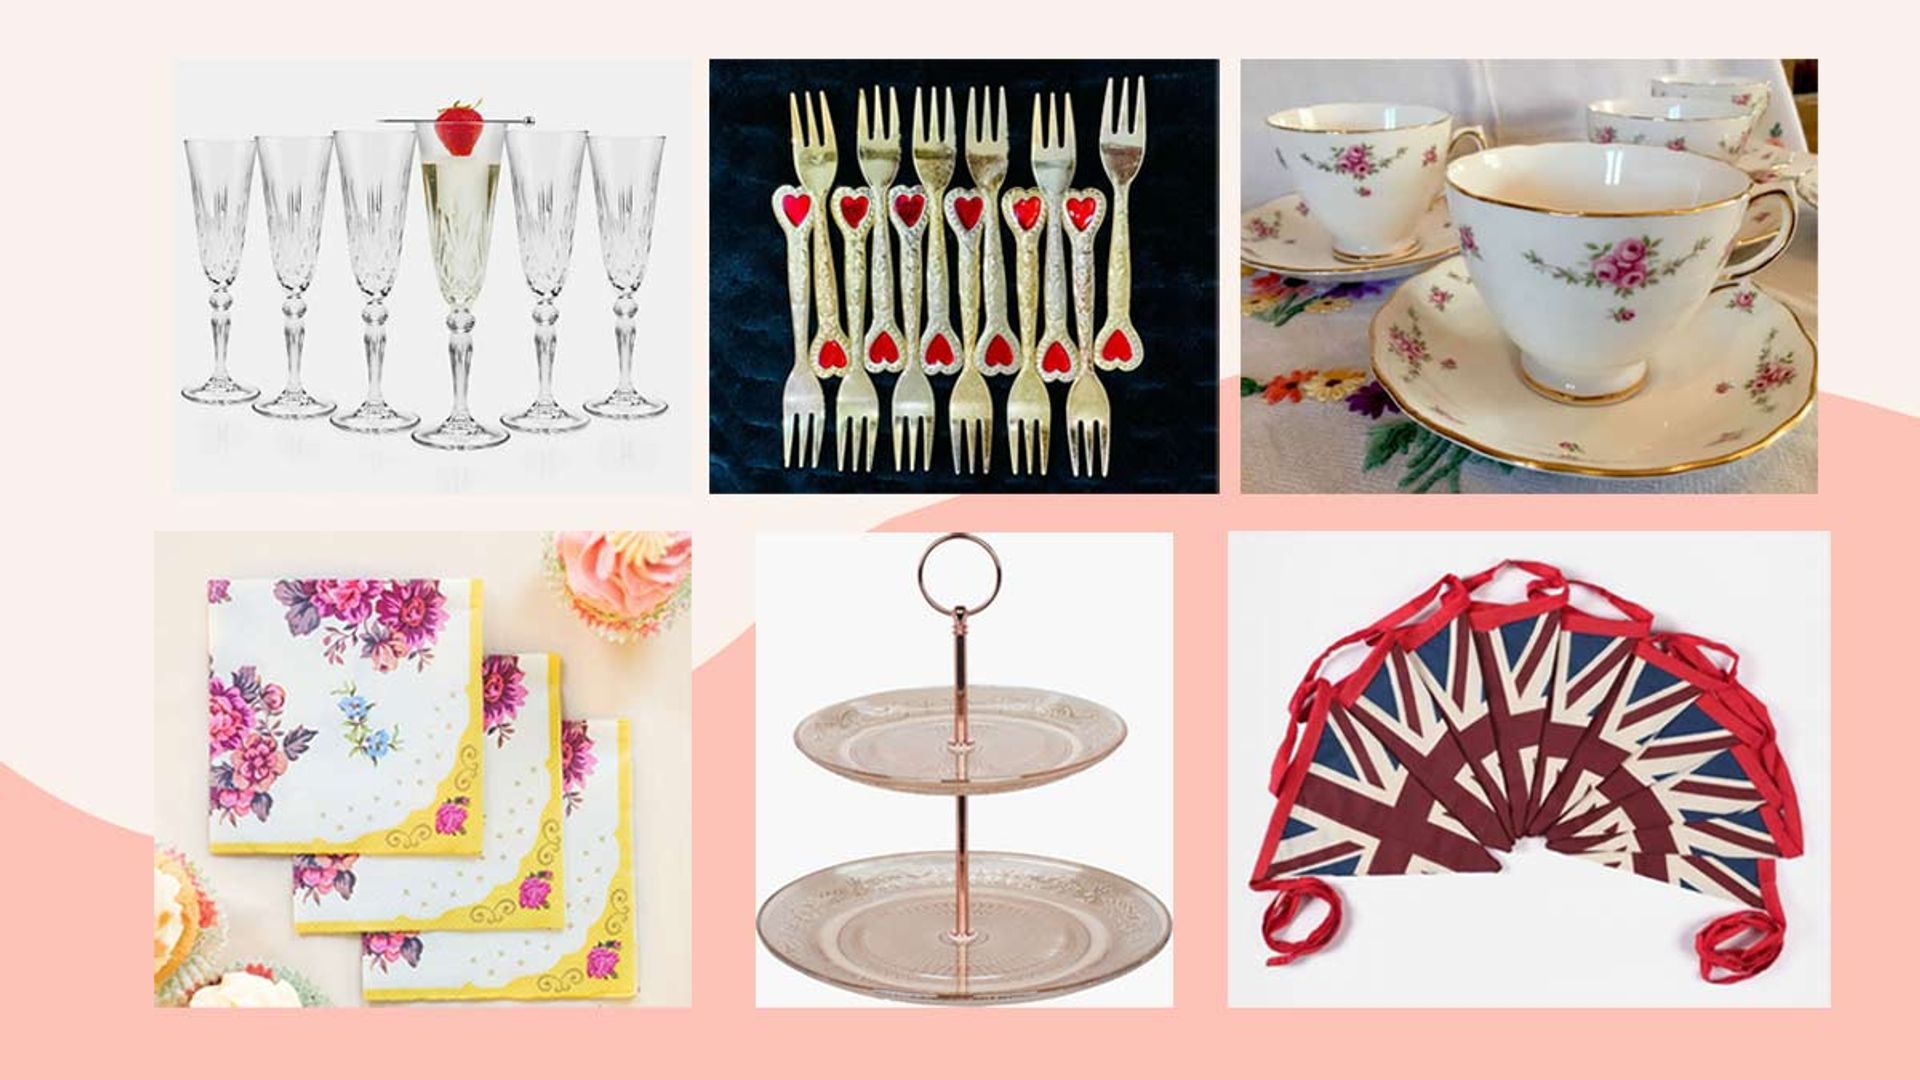 Throwing a Jubilee party? eBay's got you covered! From Vintage cake stands to Union Jack bunting